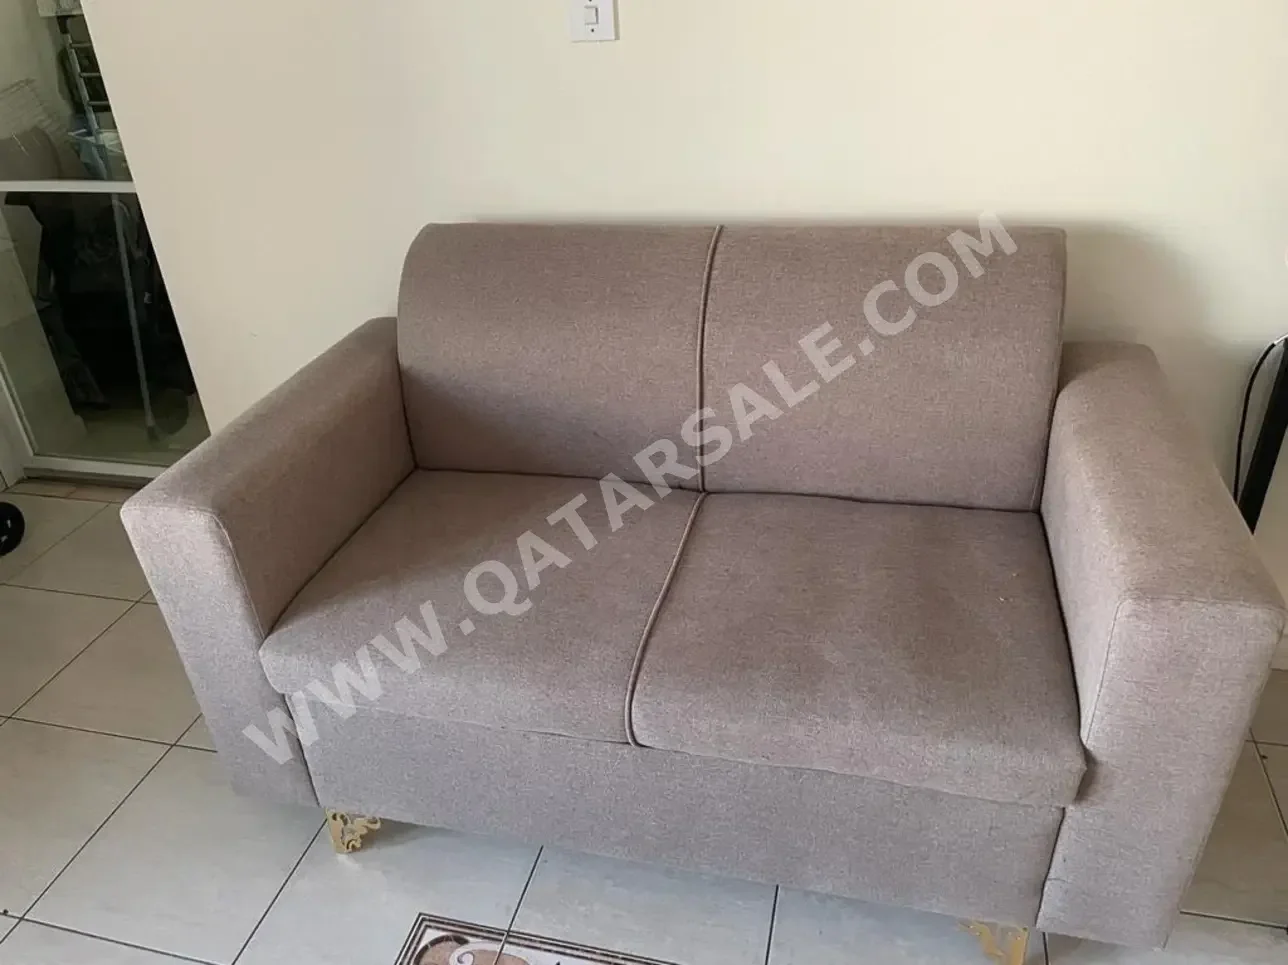 Sofas, Couches & Chairs Sofa Set  Beige